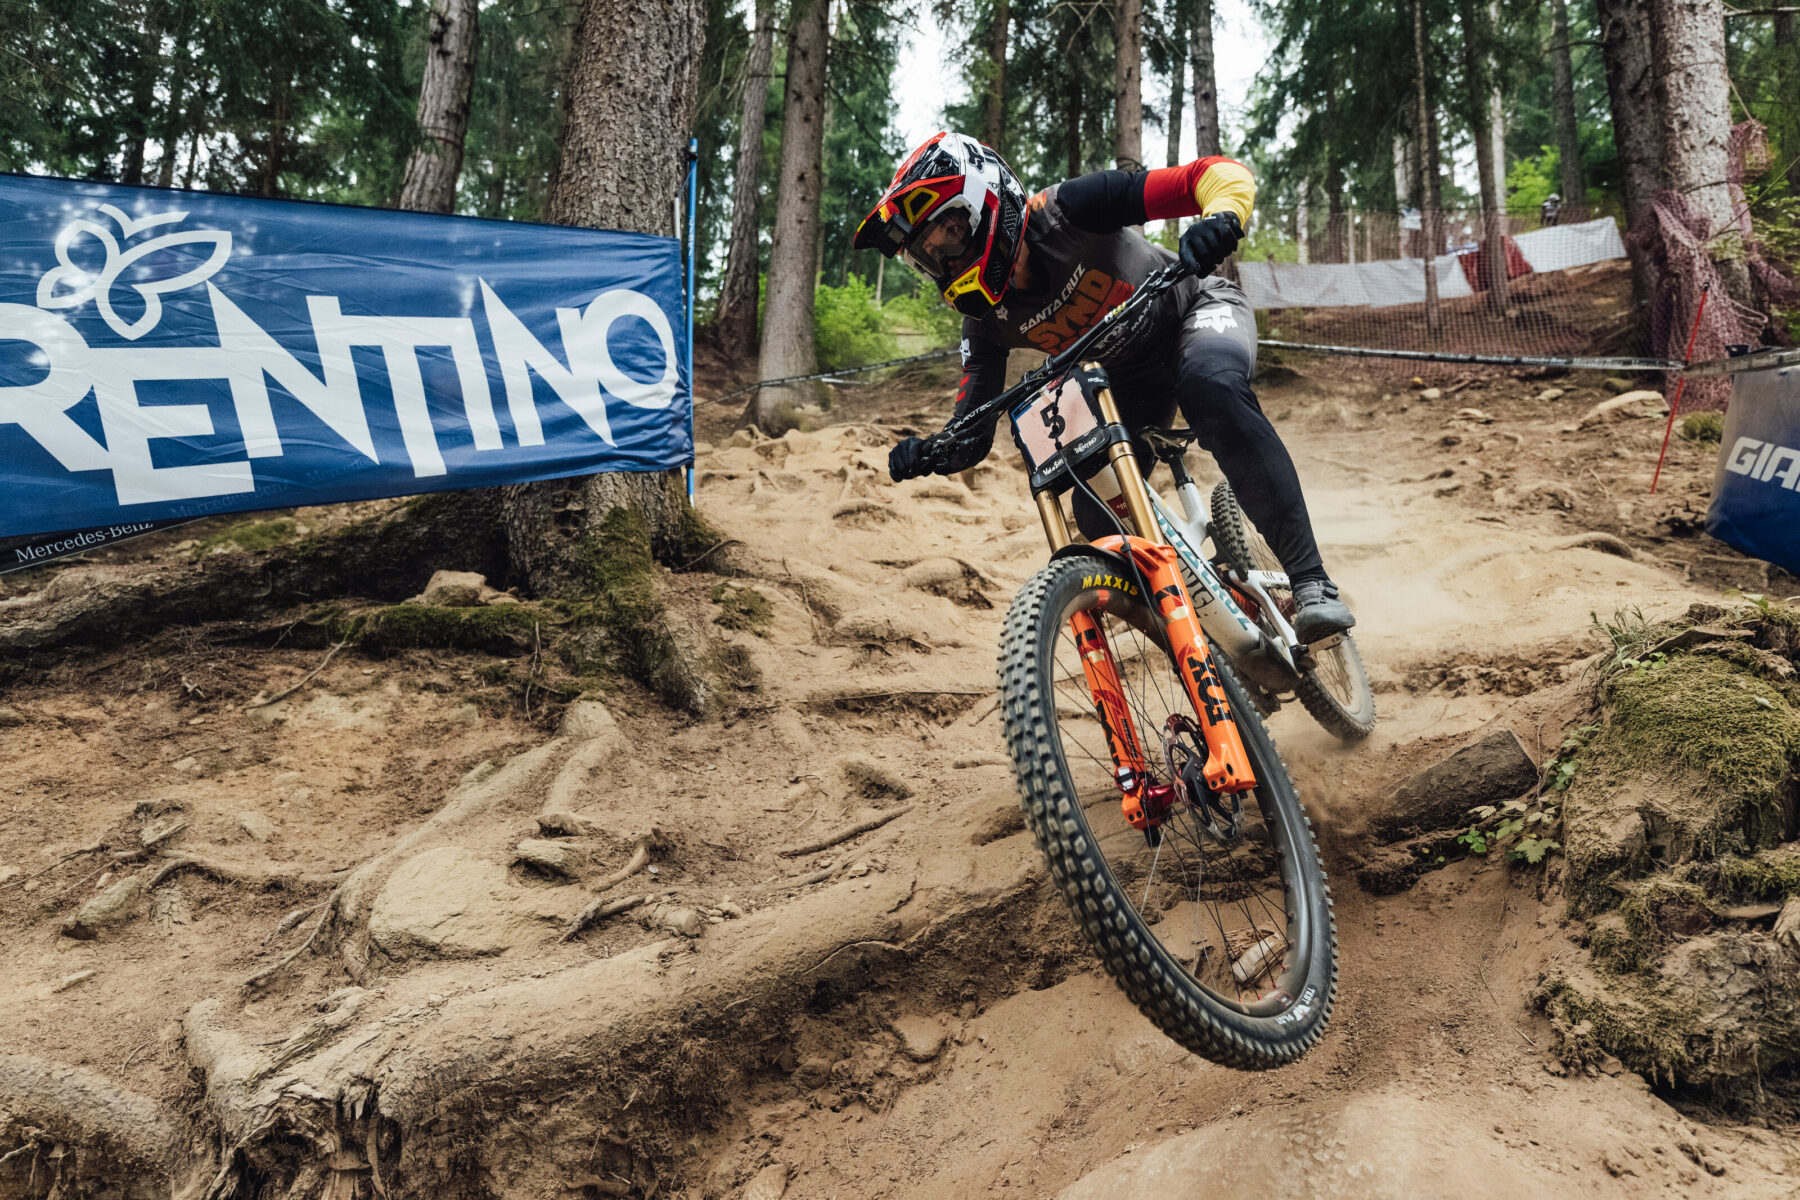 Val di Sole DH World Cup 2022 Finals